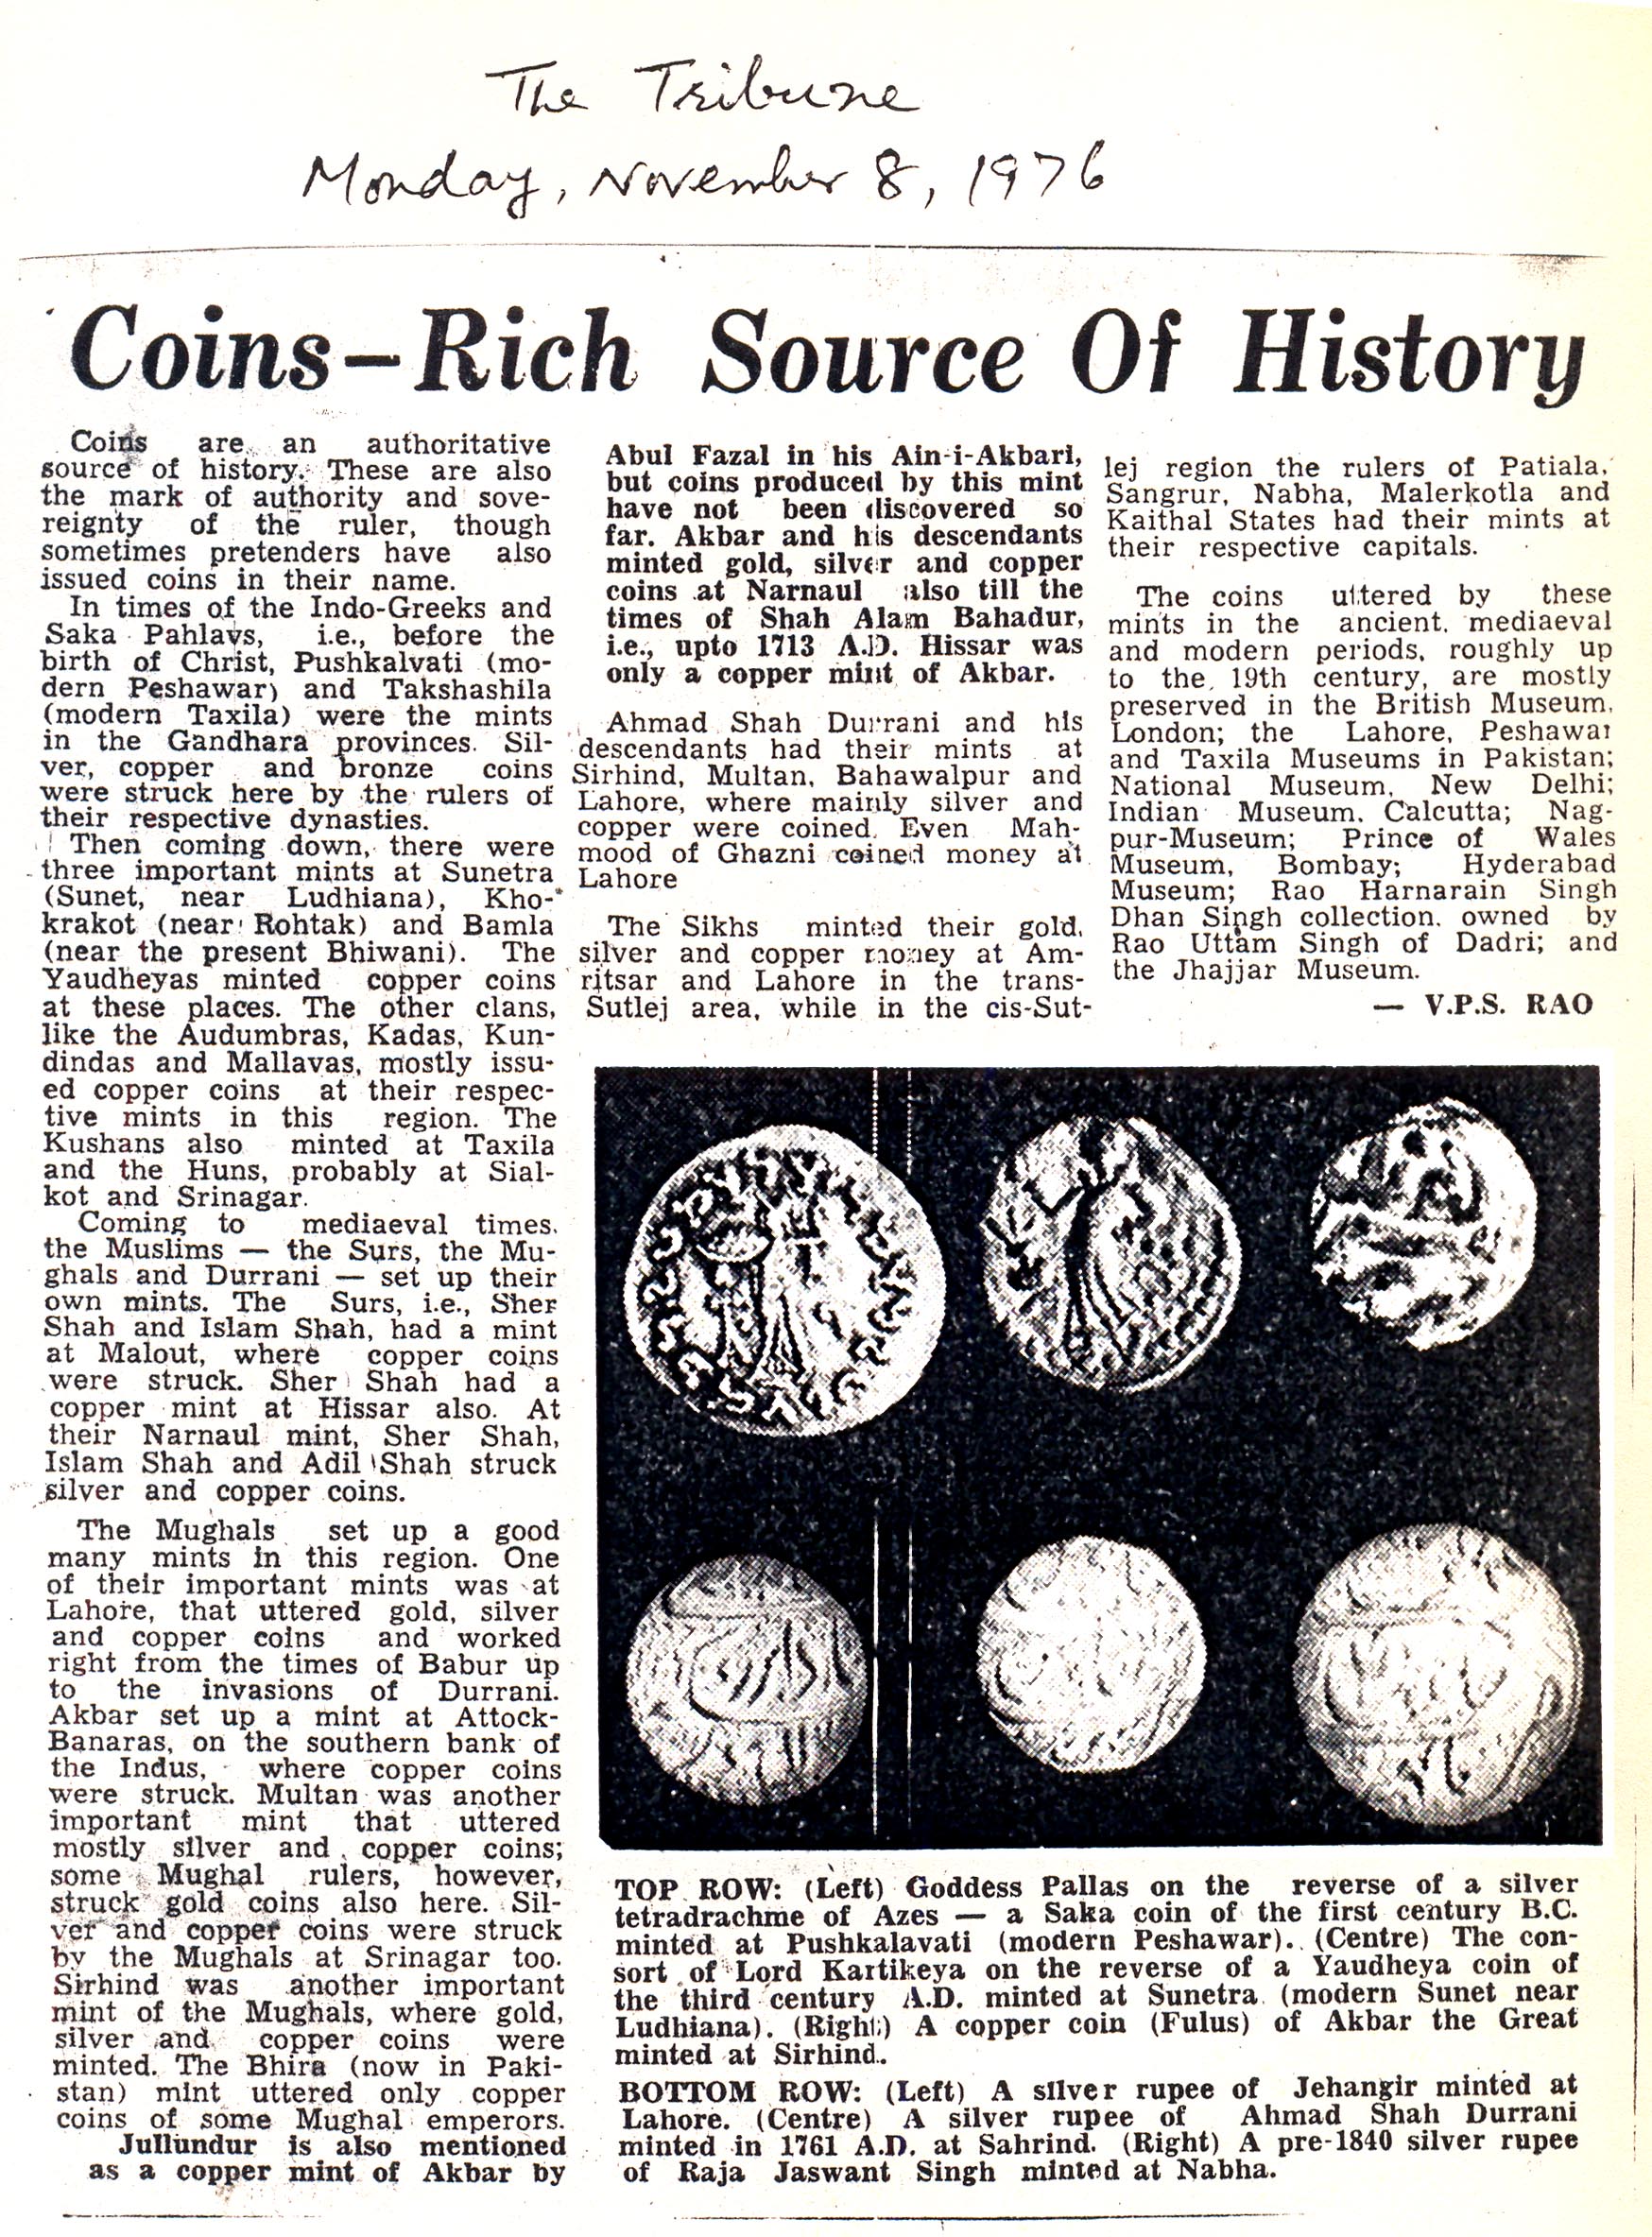 50. Sri VPS Rao on Coins — Rich Source of History